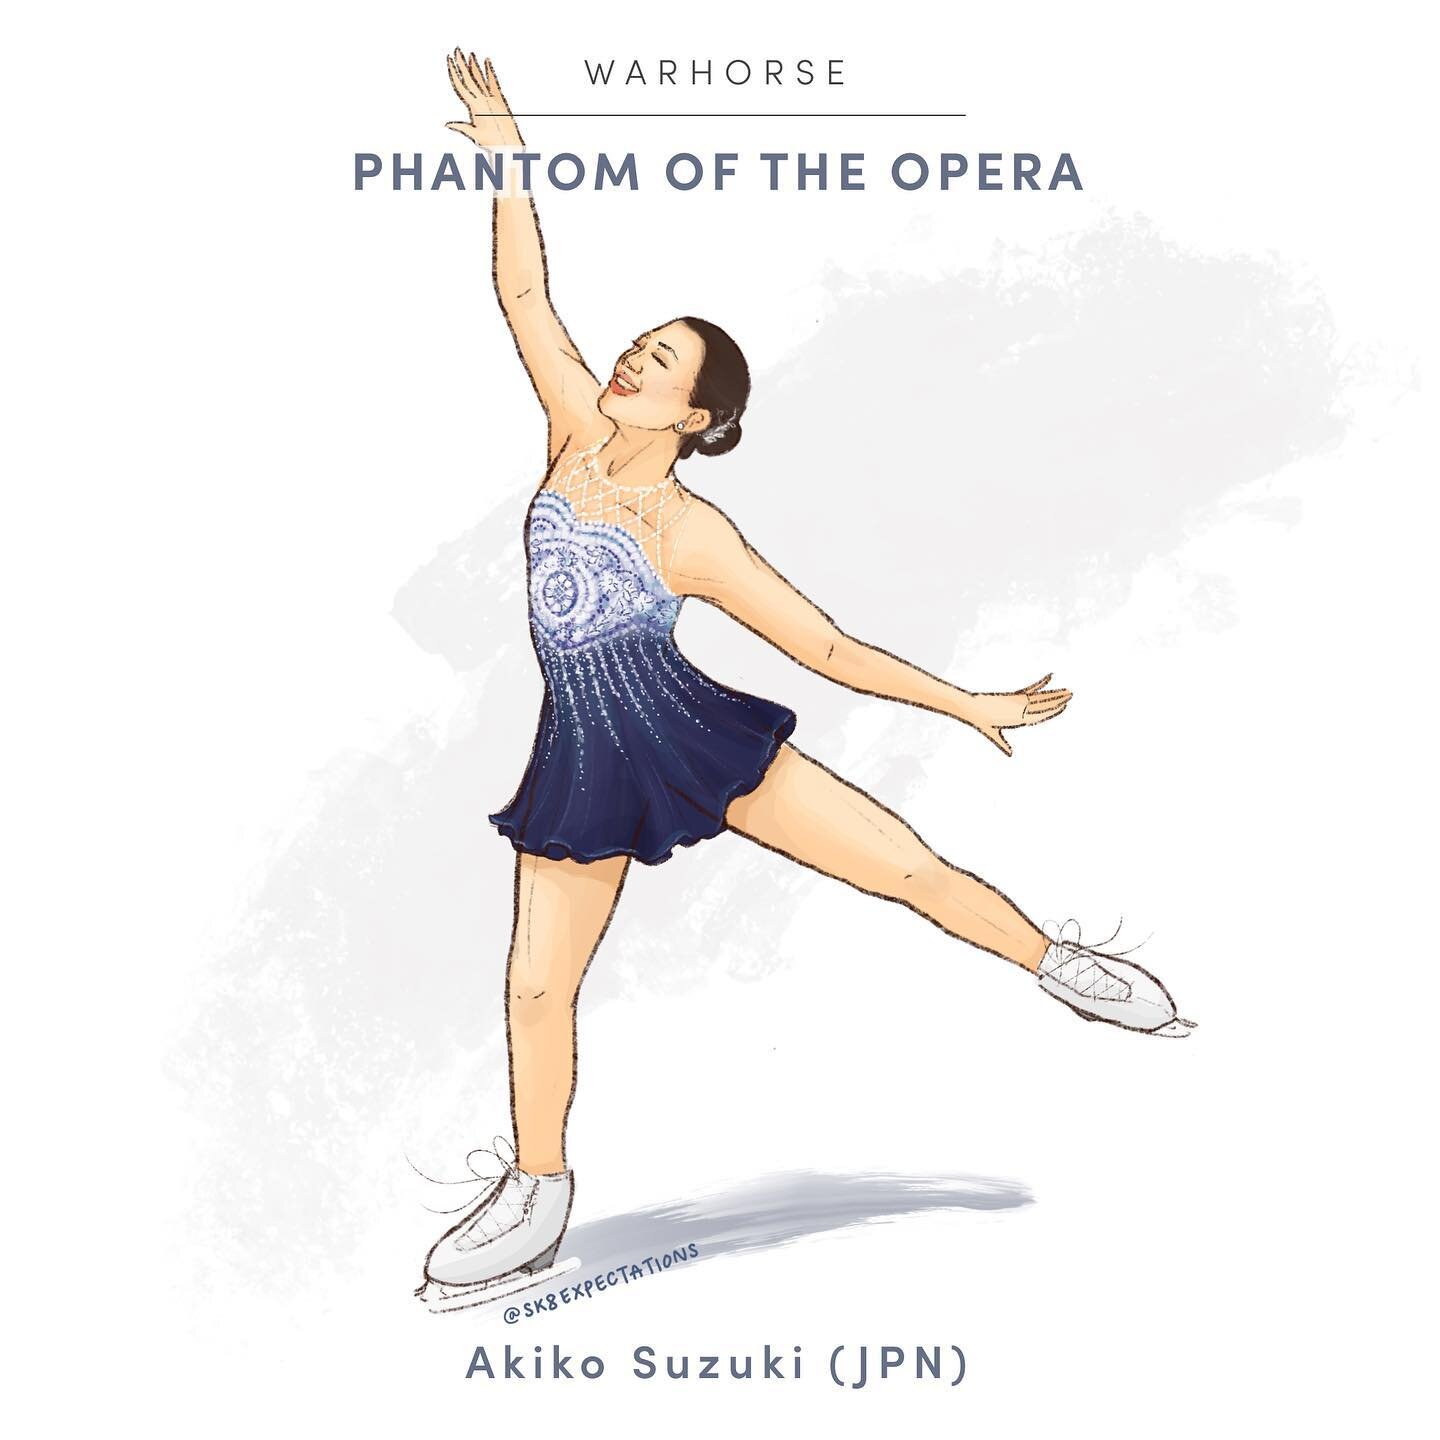 WARHORSE: &ldquo;Phantom of the Opera&rdquo; (Andrew Lloyd Webber)
-
Akiko Suzuki 🇯🇵
-
2013-14 Japan Figure Skating Championships, Free Skate 
-
Choreographed by Pasquale Camerlengo
-
Suzuki has an innate ability to become one with music. Even in m